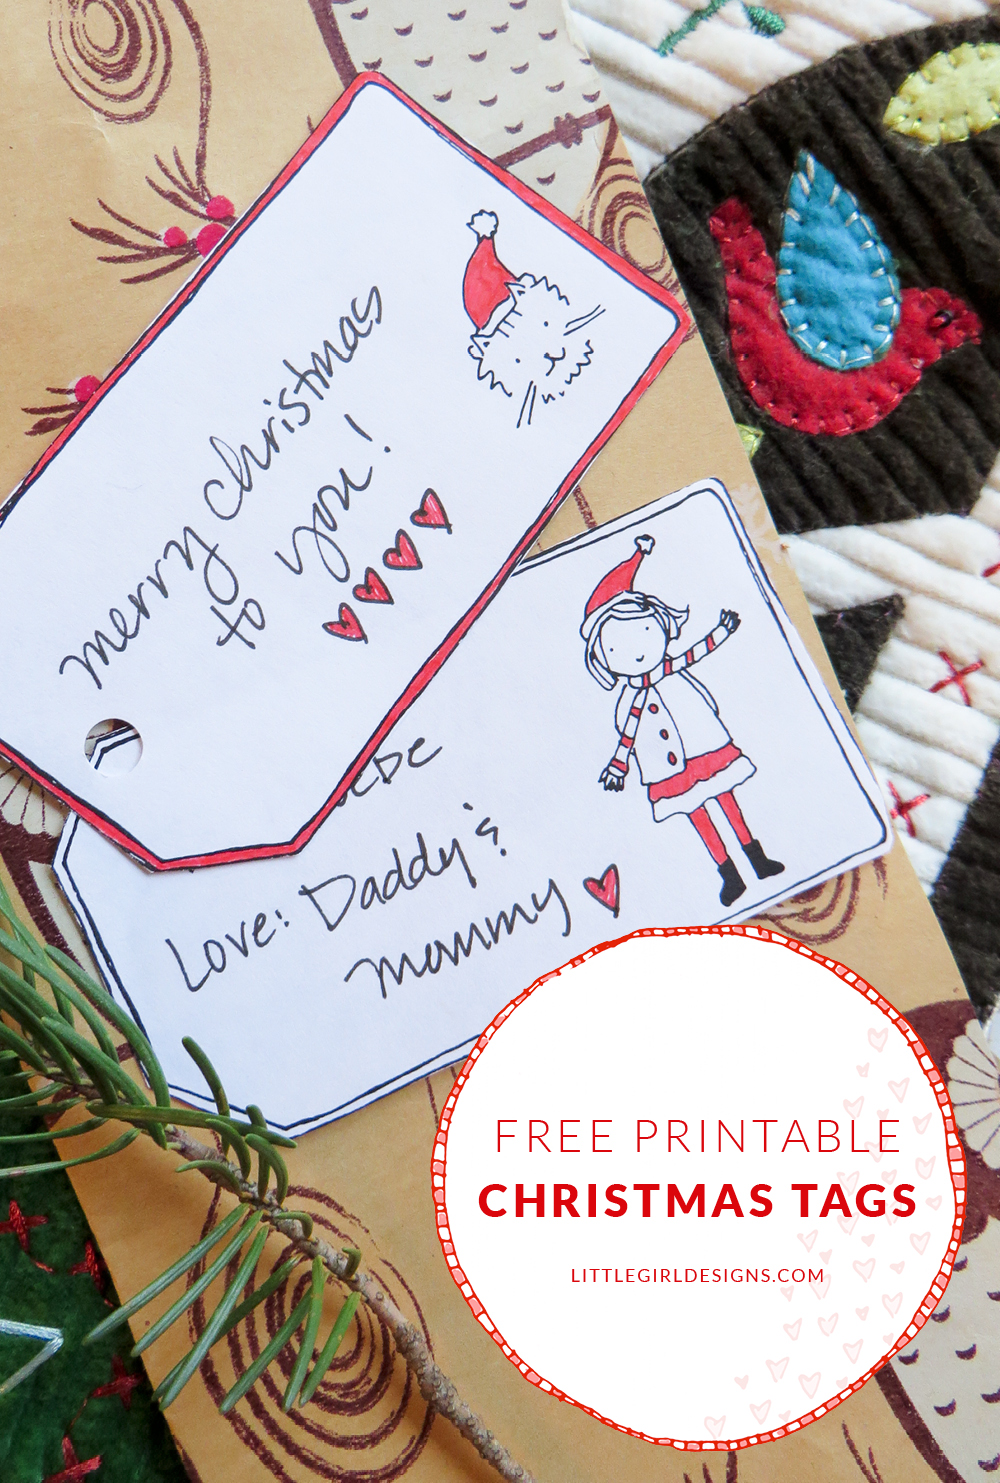 Free Printable Gift Tags - a set of sweet printable gift tags for you to download and enjoy @ littlegirldesigns.com